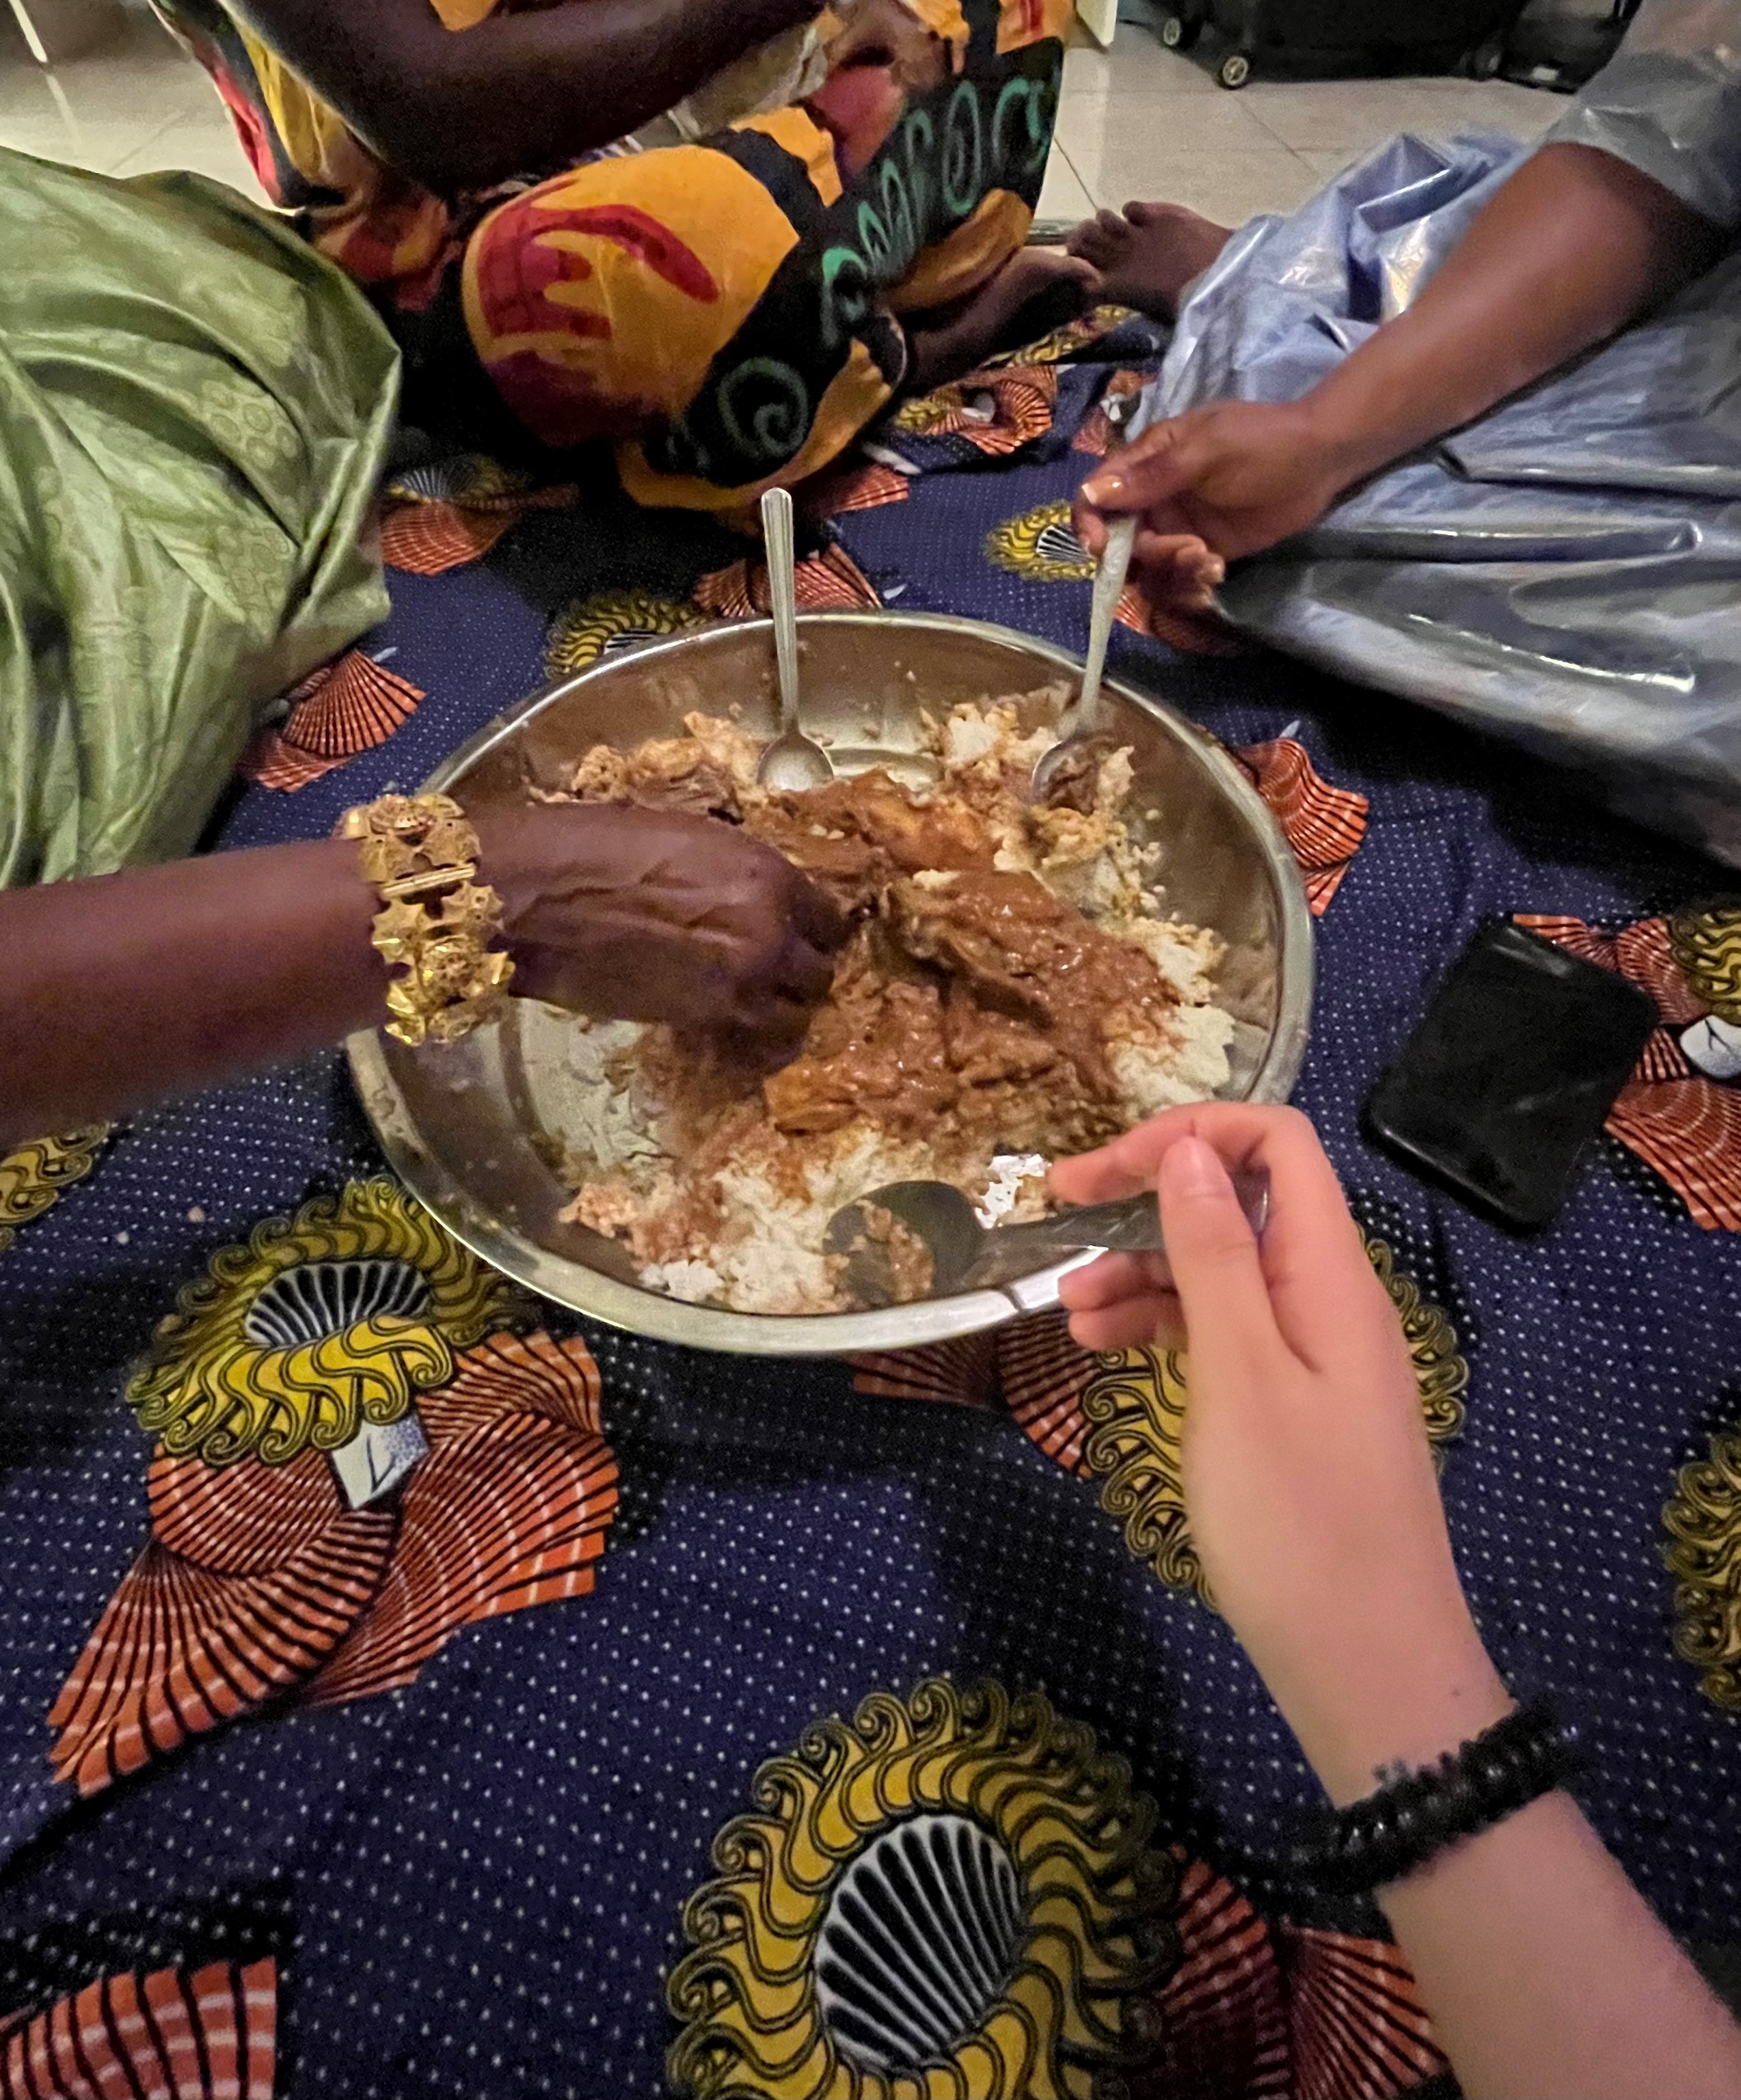 The Gambian food